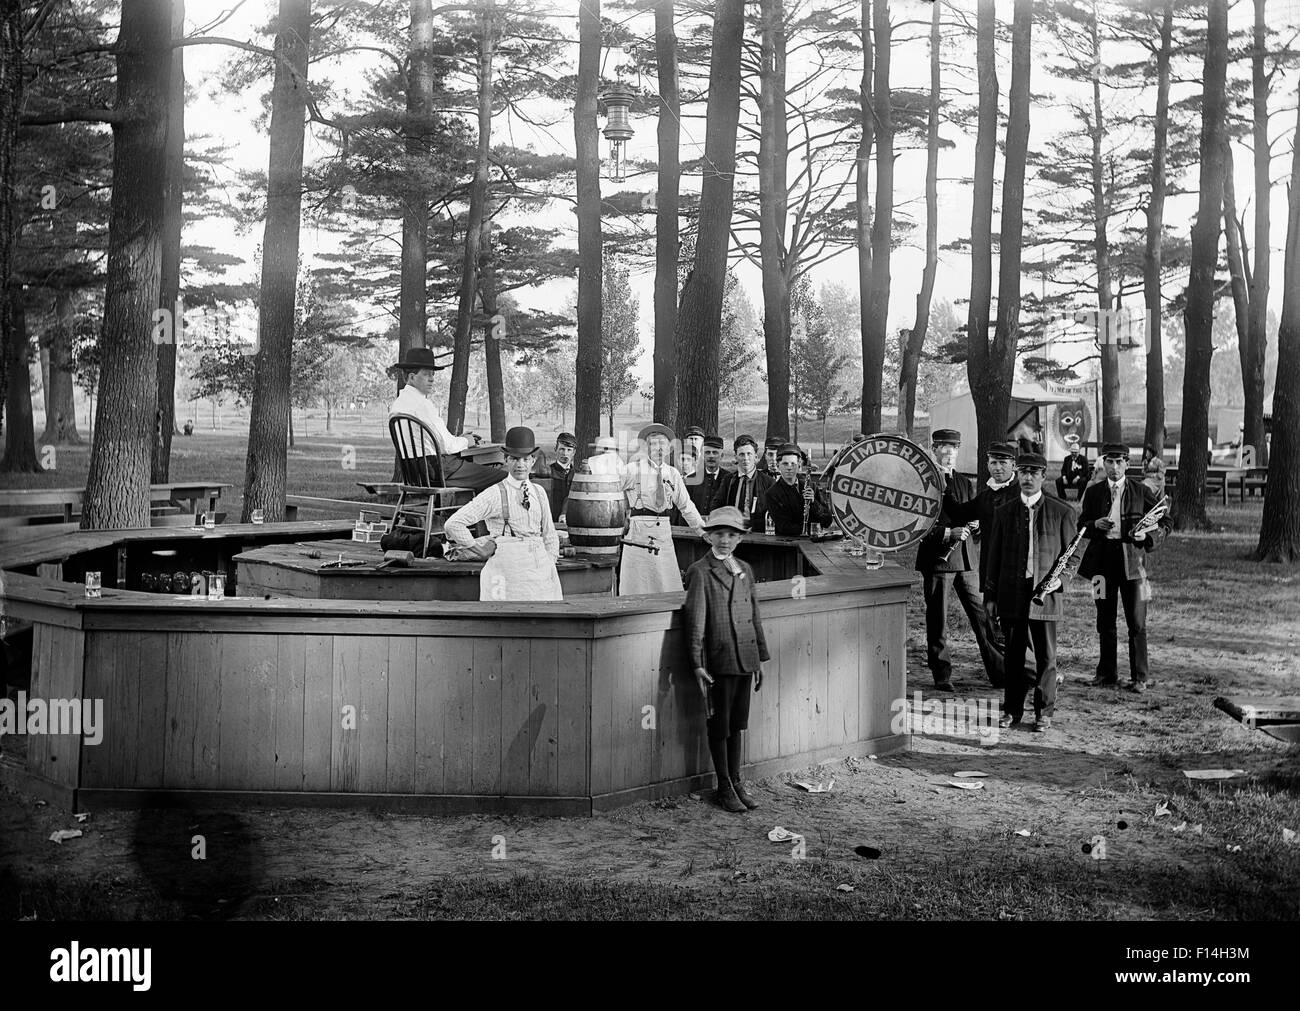 1890s TURN OF THE CENTURY BAND AT FESTIVAL STAND IN WOODED PARK AREA Stock Photo